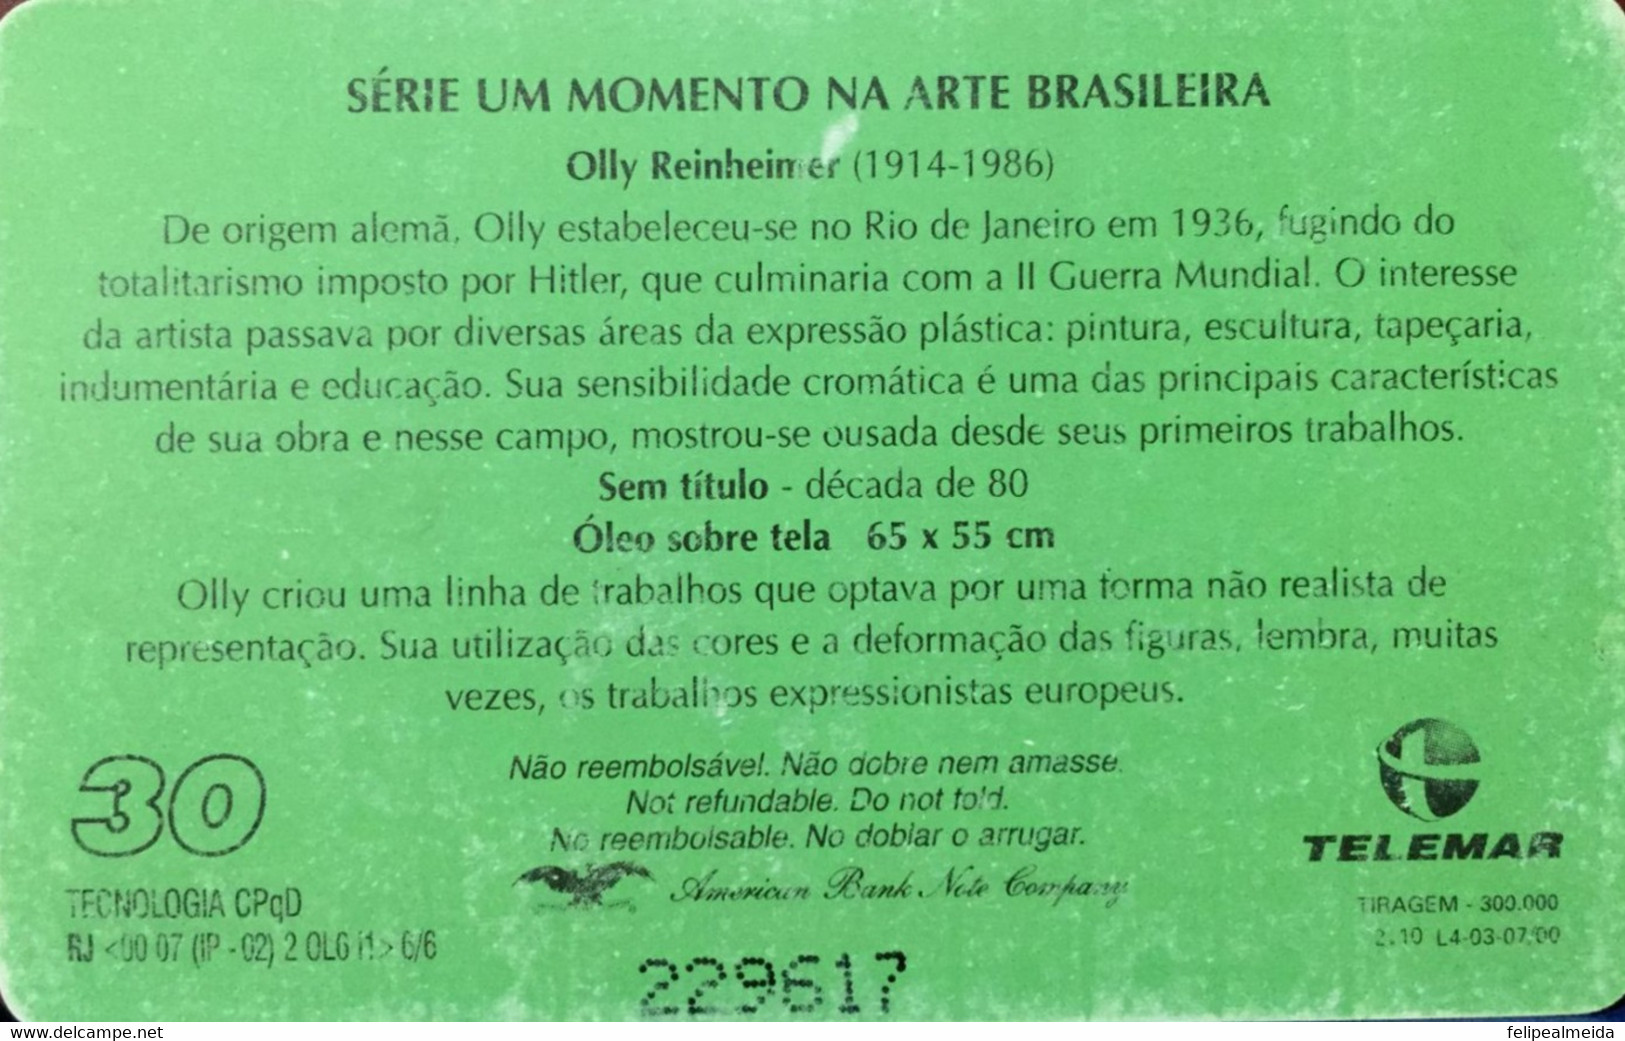 Phone Card Manufactured By Telemar In 2000 - Series A Moment In Brazilian Art - Artist Olly Reinheimeier 1914 To 1986 - Cultural